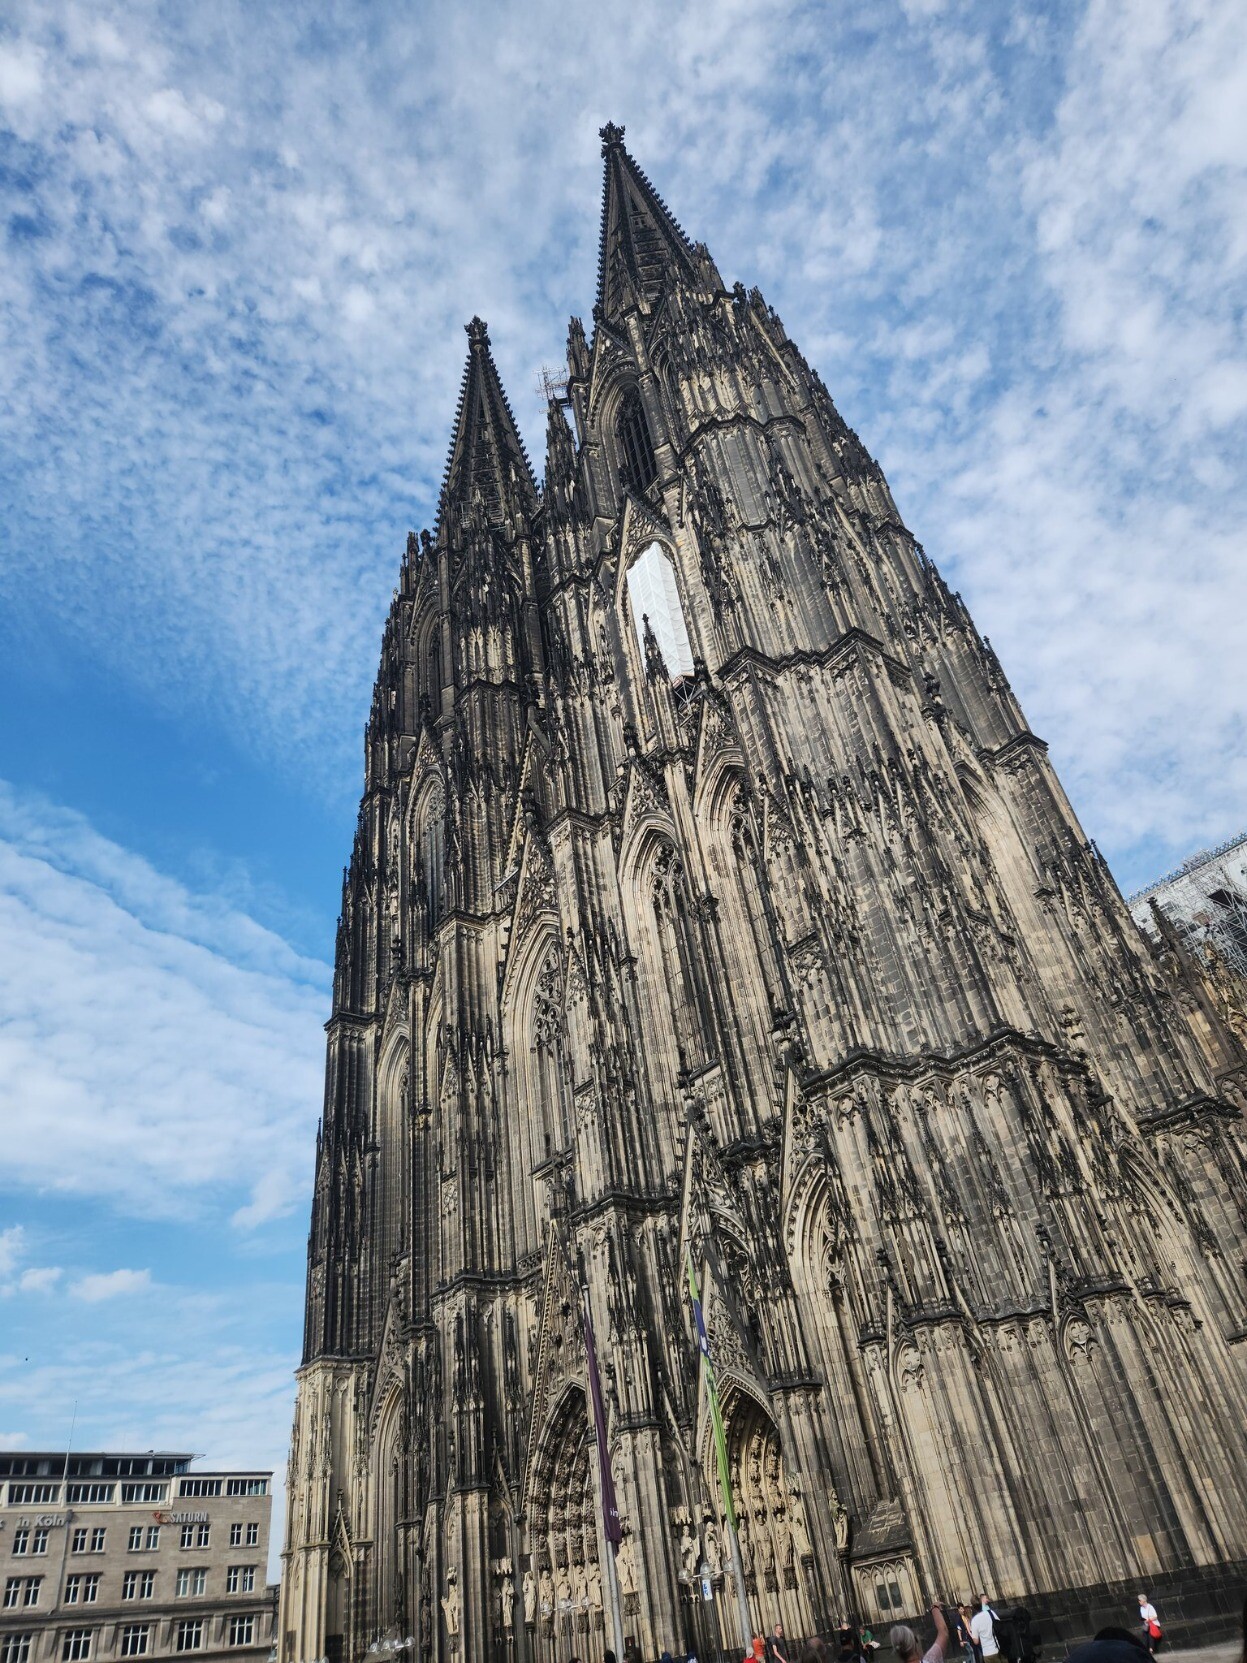 Photo of the massive Cologne cathedral against a partly cloudy blue sky